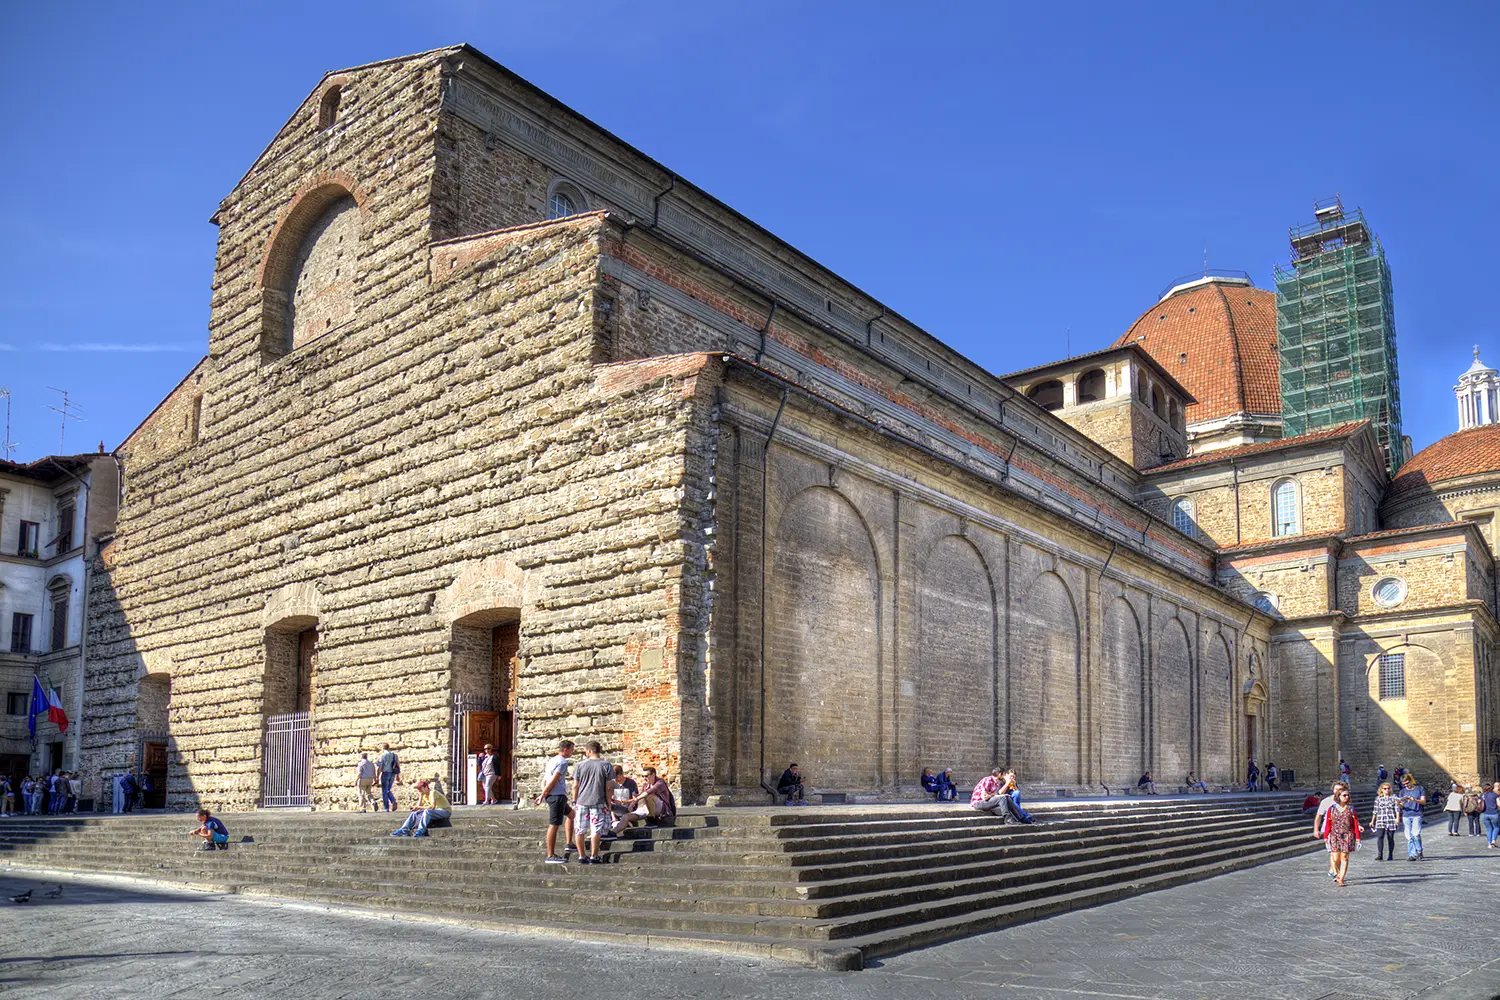 People sitting on the steps of the Basilica di San Lorenzo church in Florence, Italy